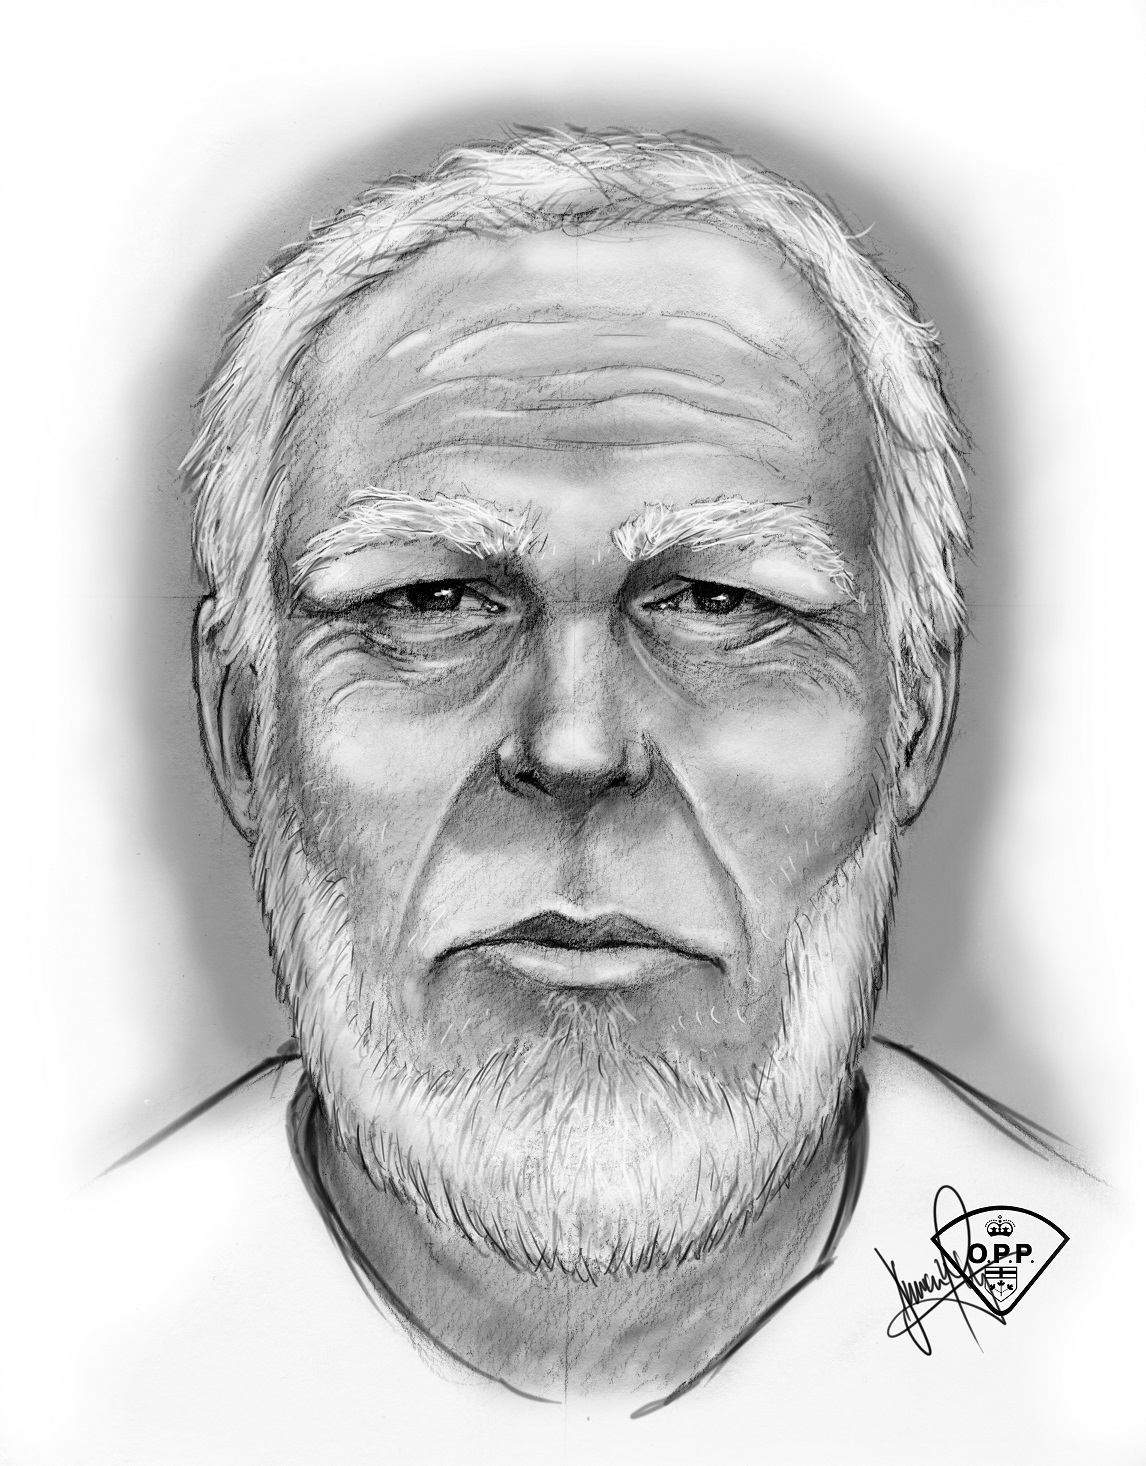 Police have released a composite sketch of a suspect wanted in connection with an indecent act in Meaford.